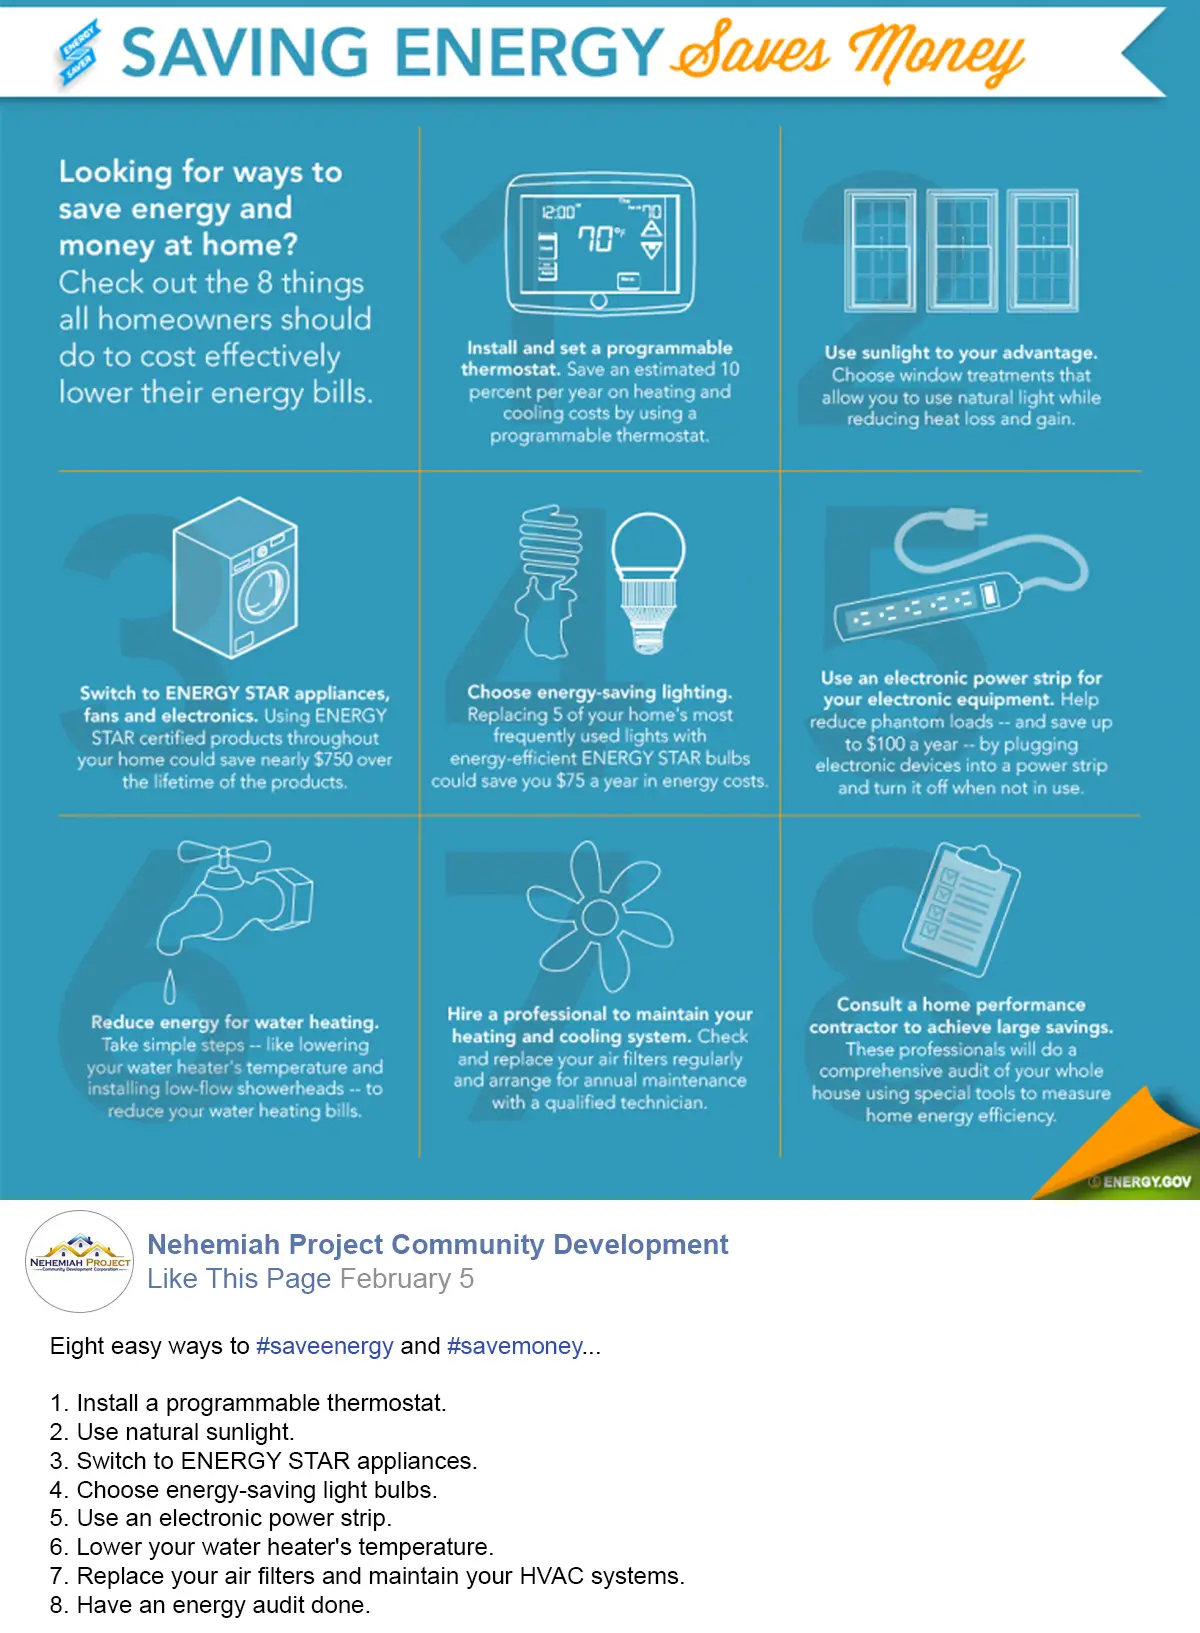 Infographic on ways to save with Energy Star appliances and electronics. 